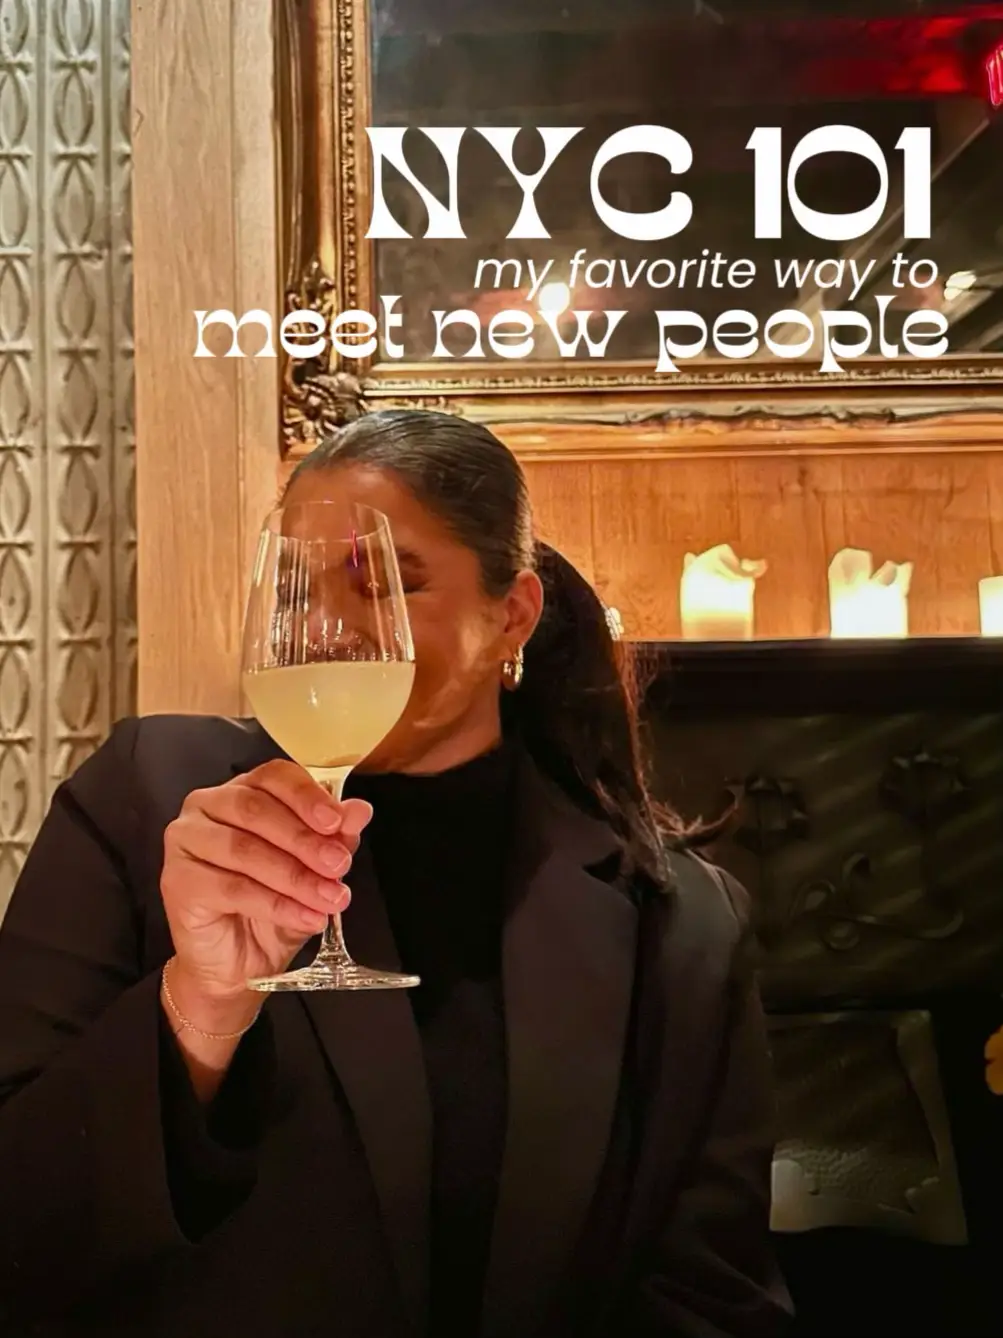  A woman in a black jacket is holding a glass of wine in front of her face.